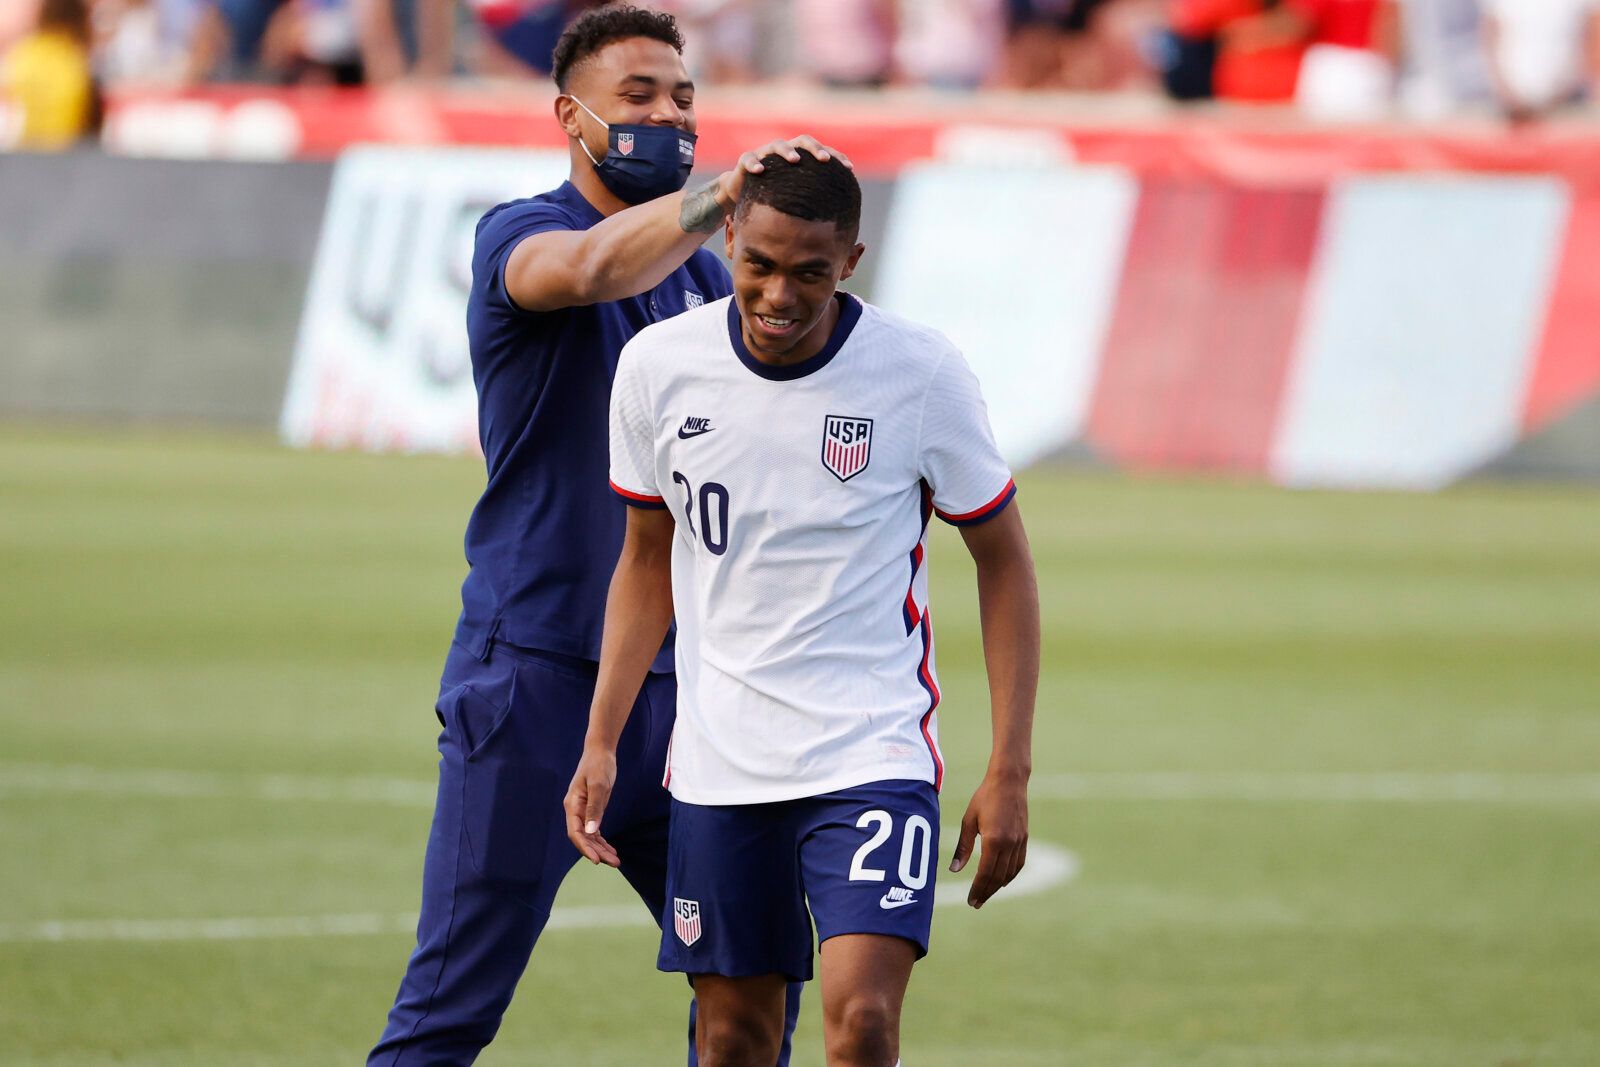 Jun 9, 2021; Sandy, Utah, USA; United States defender Reggie Cannon (20) is congratulated after their 4-0 win against Costa Rica during an international friendly soccer match at Rio Tinto Stadium. Mandatory Credit: Jeffrey Swinger-USA TODAY Sports